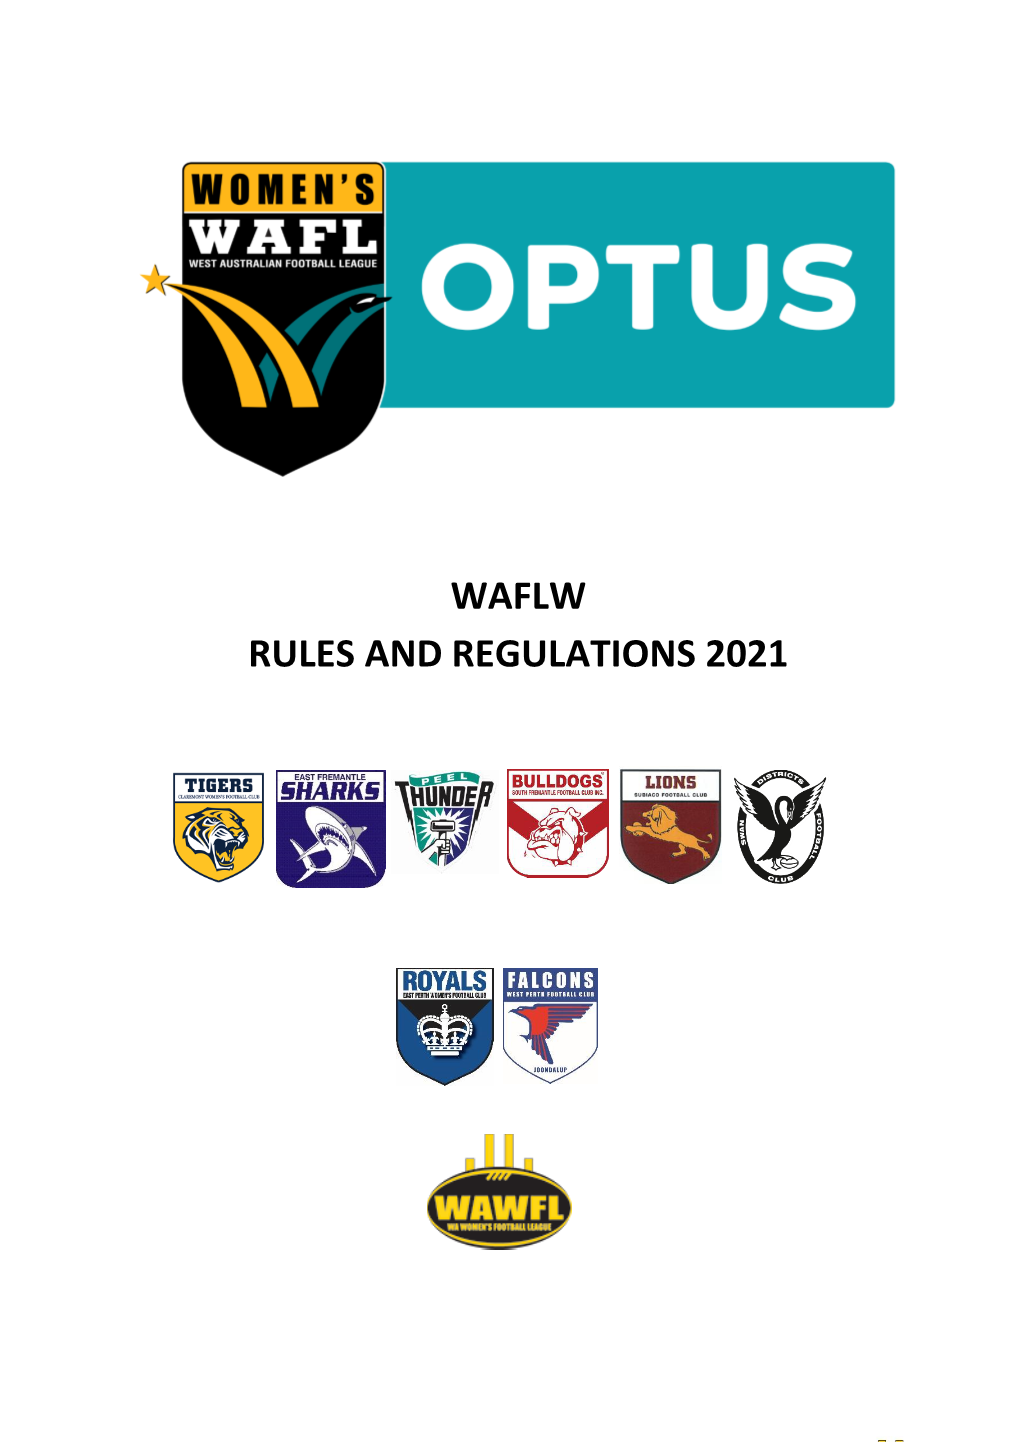 Waflw Rules and Regulations 2021